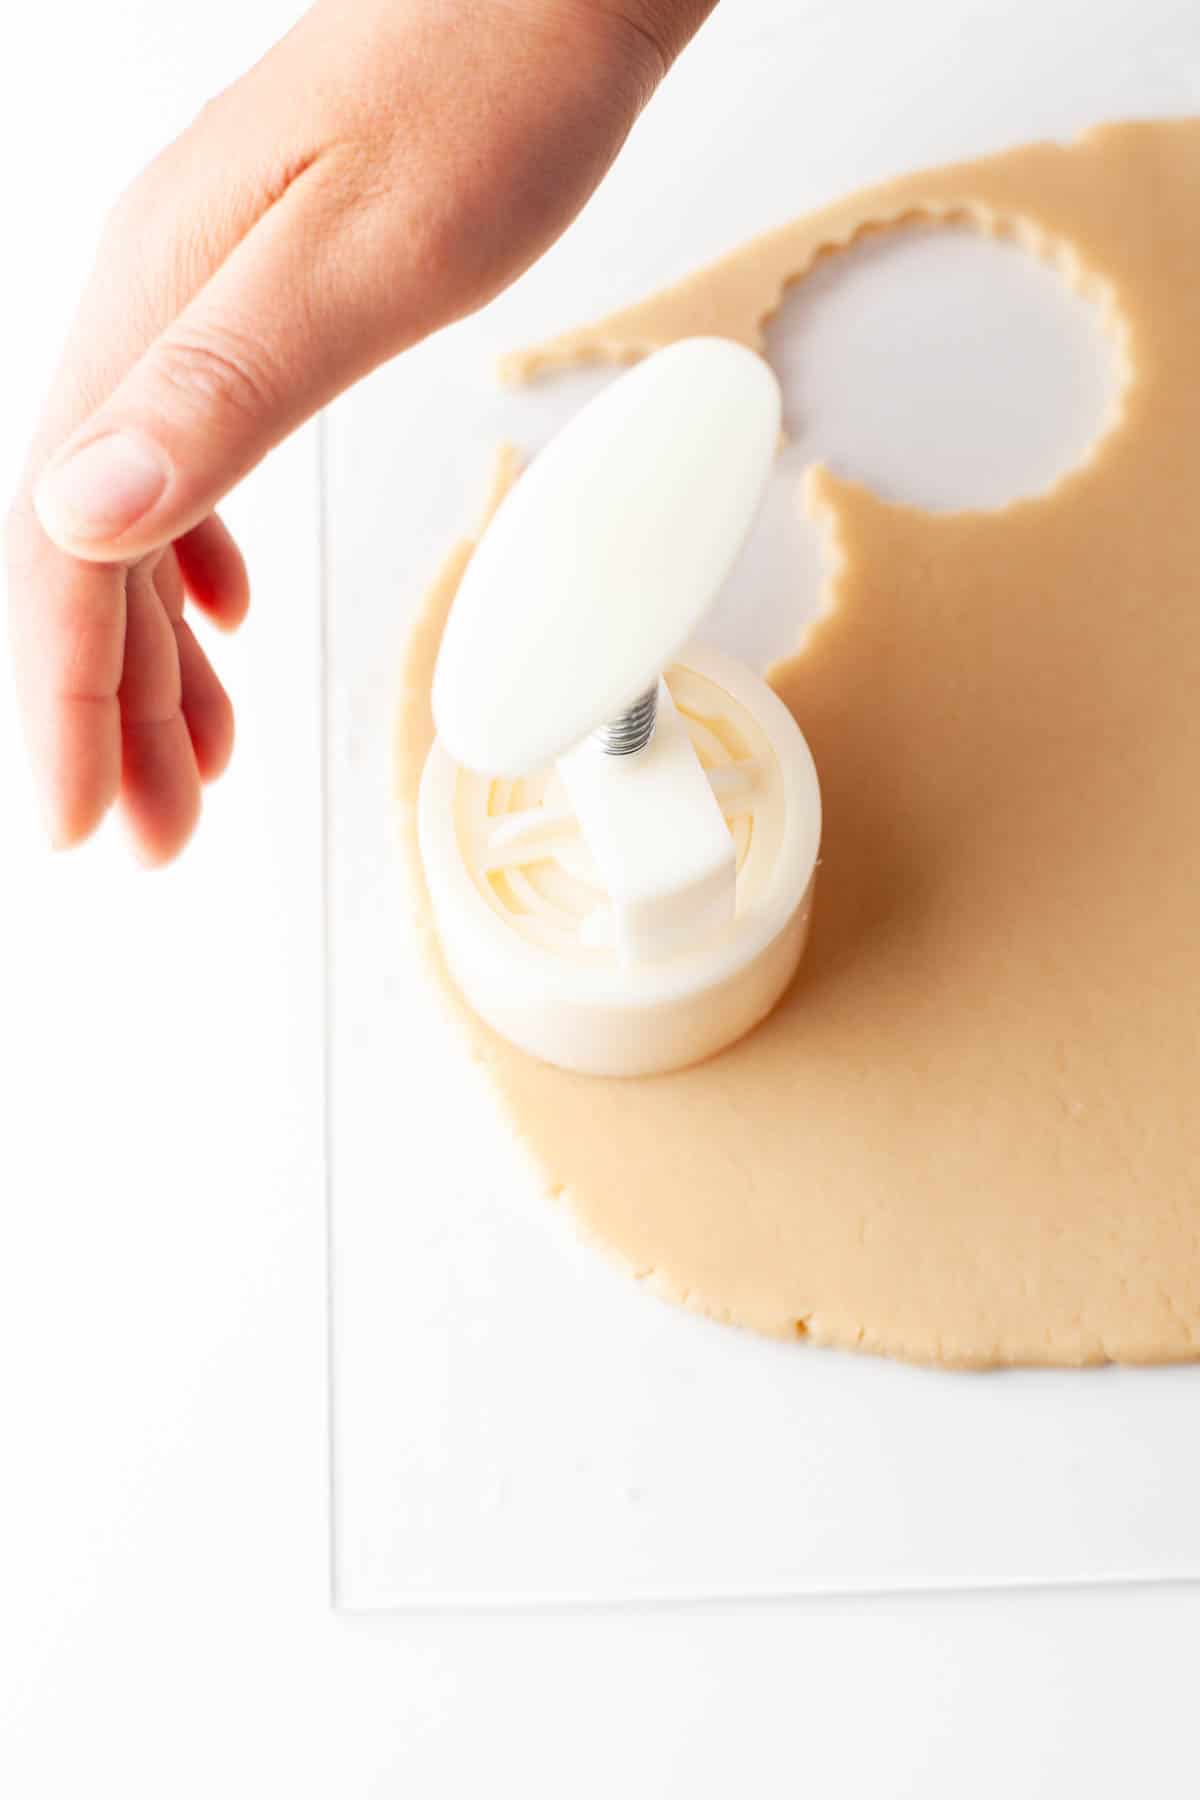 A person using a cookie cutter to make dulce de leche cookies.